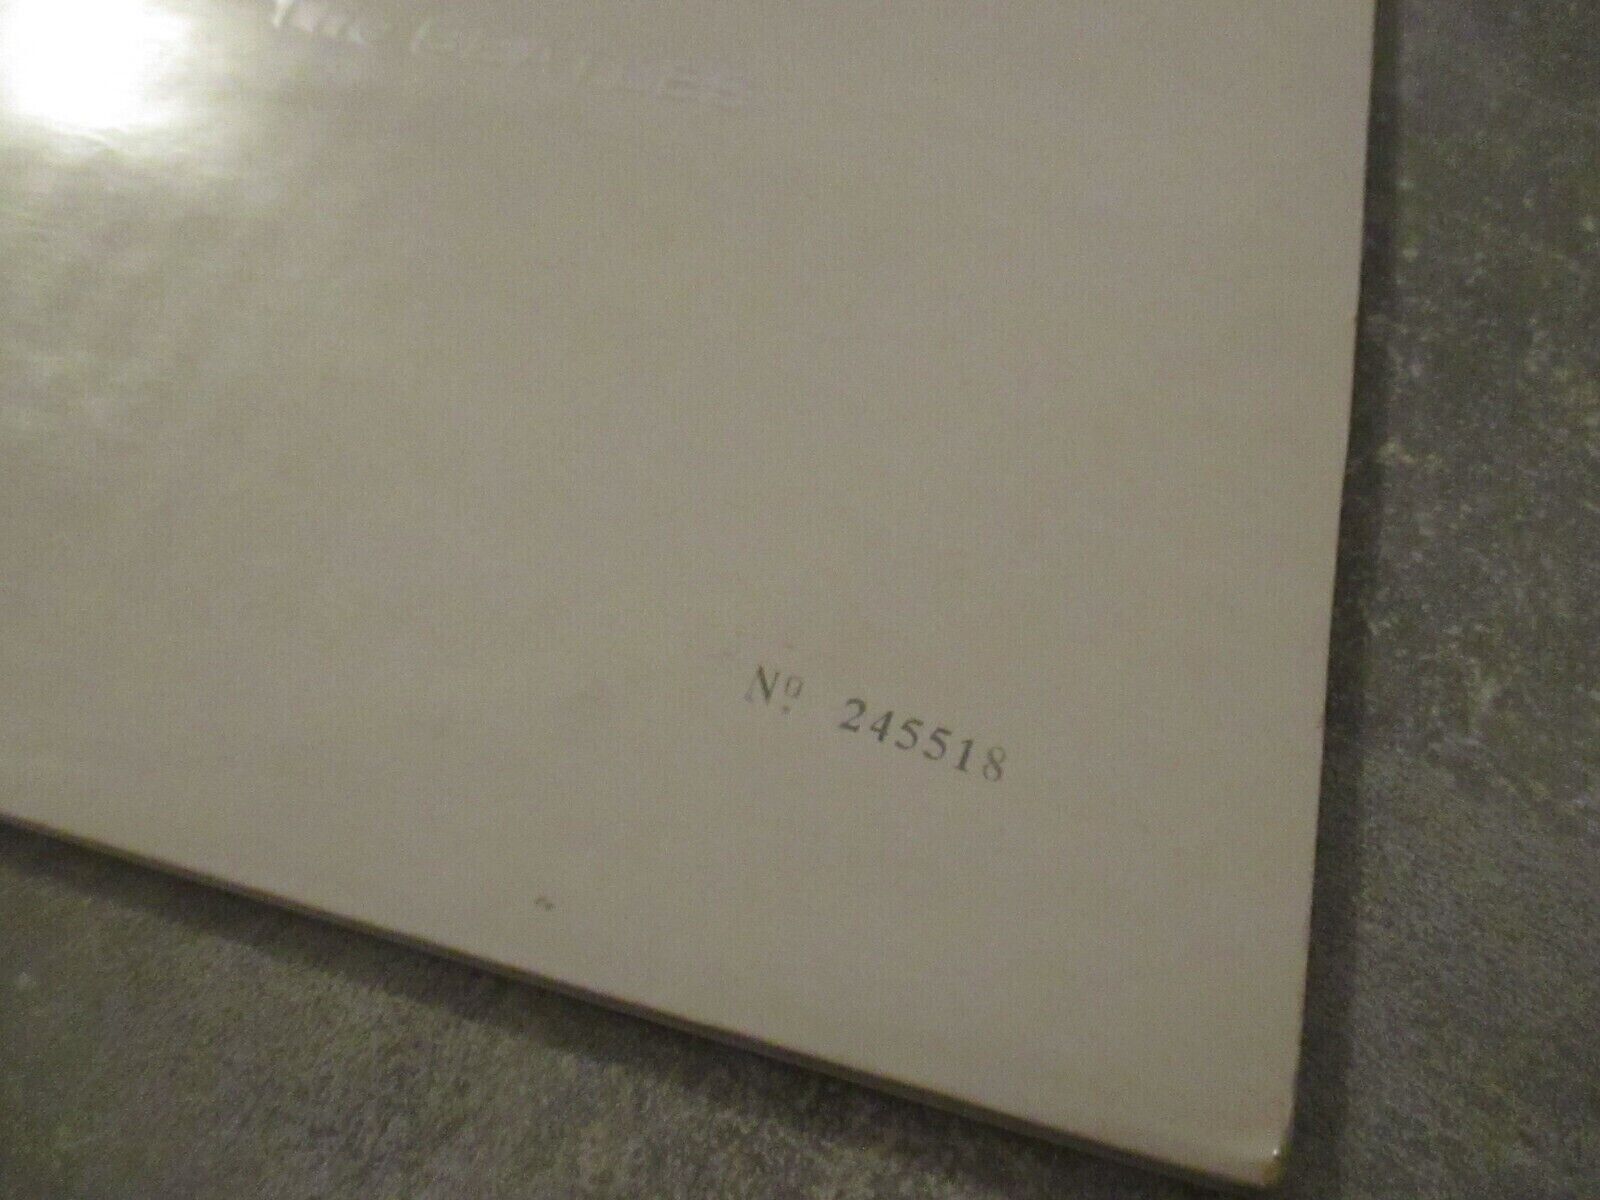 The BEATLES - White Album - PCS 7067 - UK press - Stereo - Great Condition 